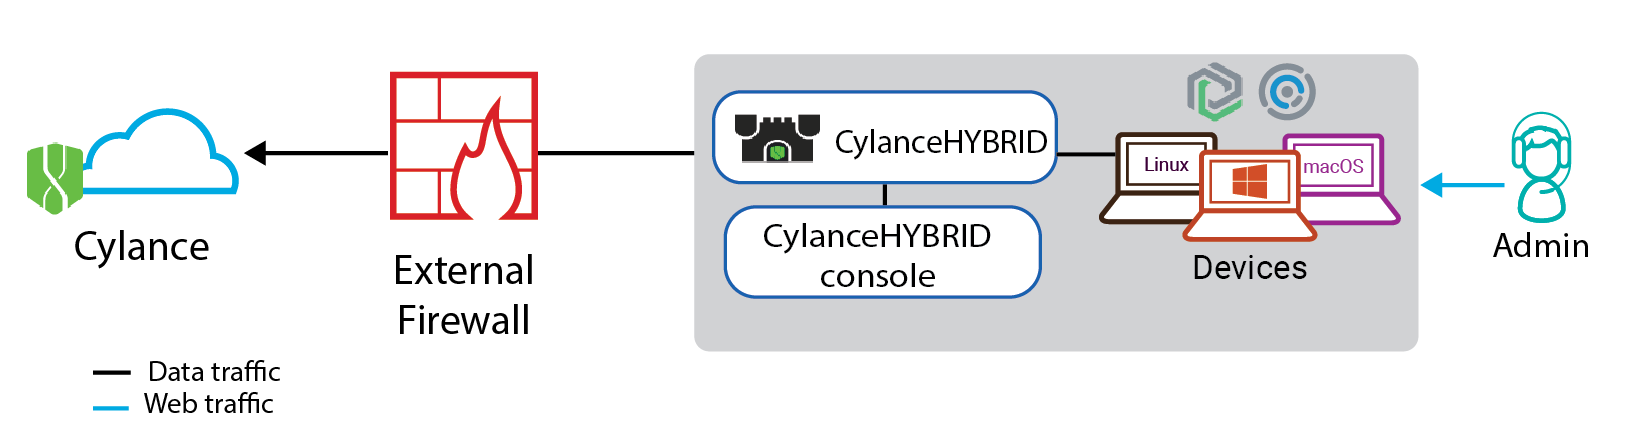 The full architecture of the Cylance Hybrid solution